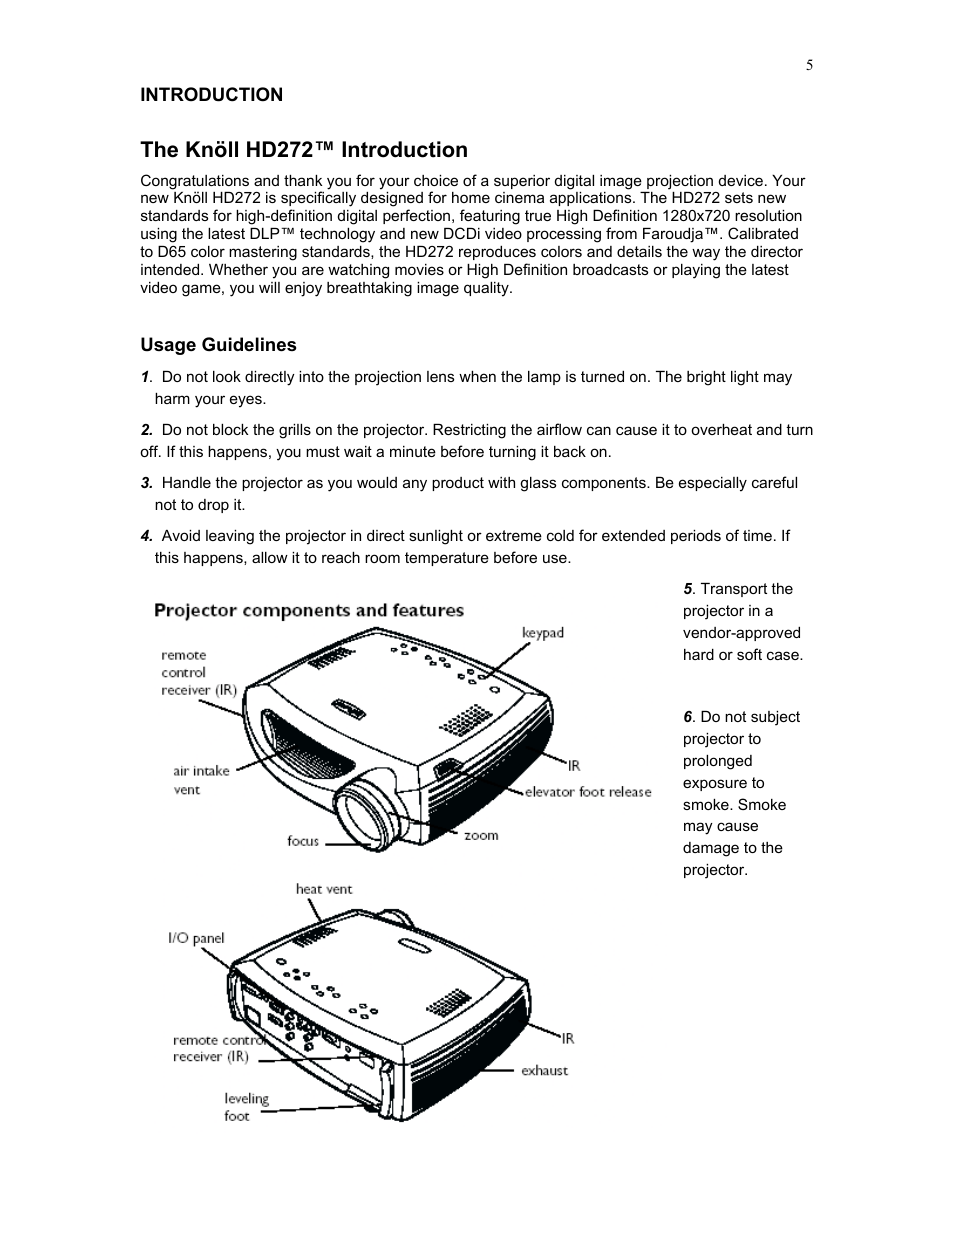 The knöll hd272™ introduction | Knoll Systems HD272 User Manual | Page 5 / 34